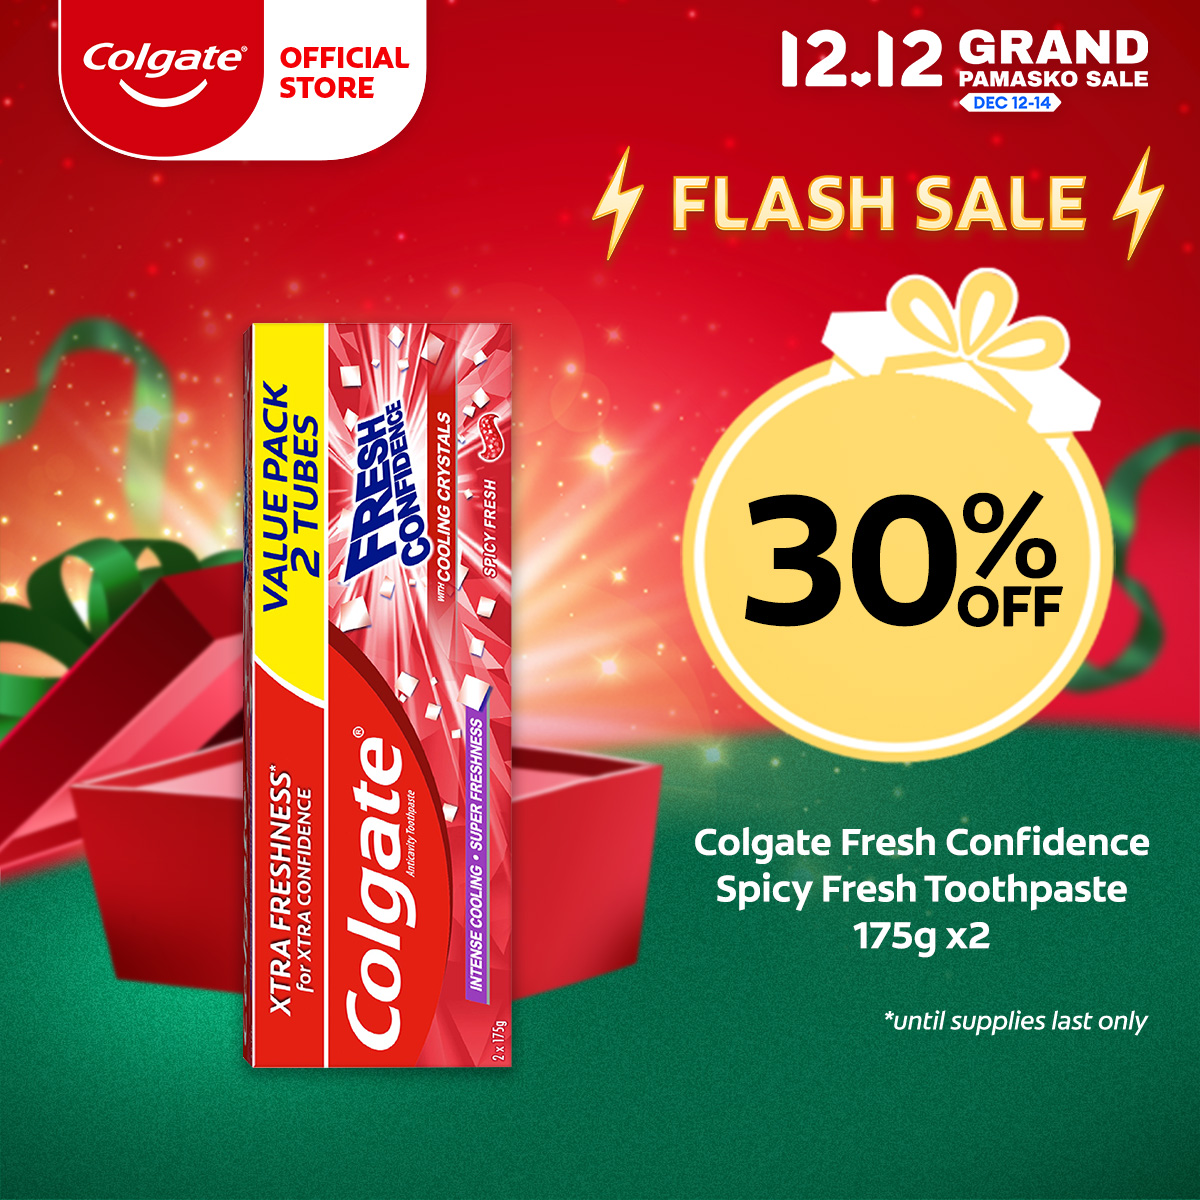 Lazada Philippines - Colgate Fresh Confidence Spicy Fresh Toothpaste with Cooling Crystals 173g Twin Pack